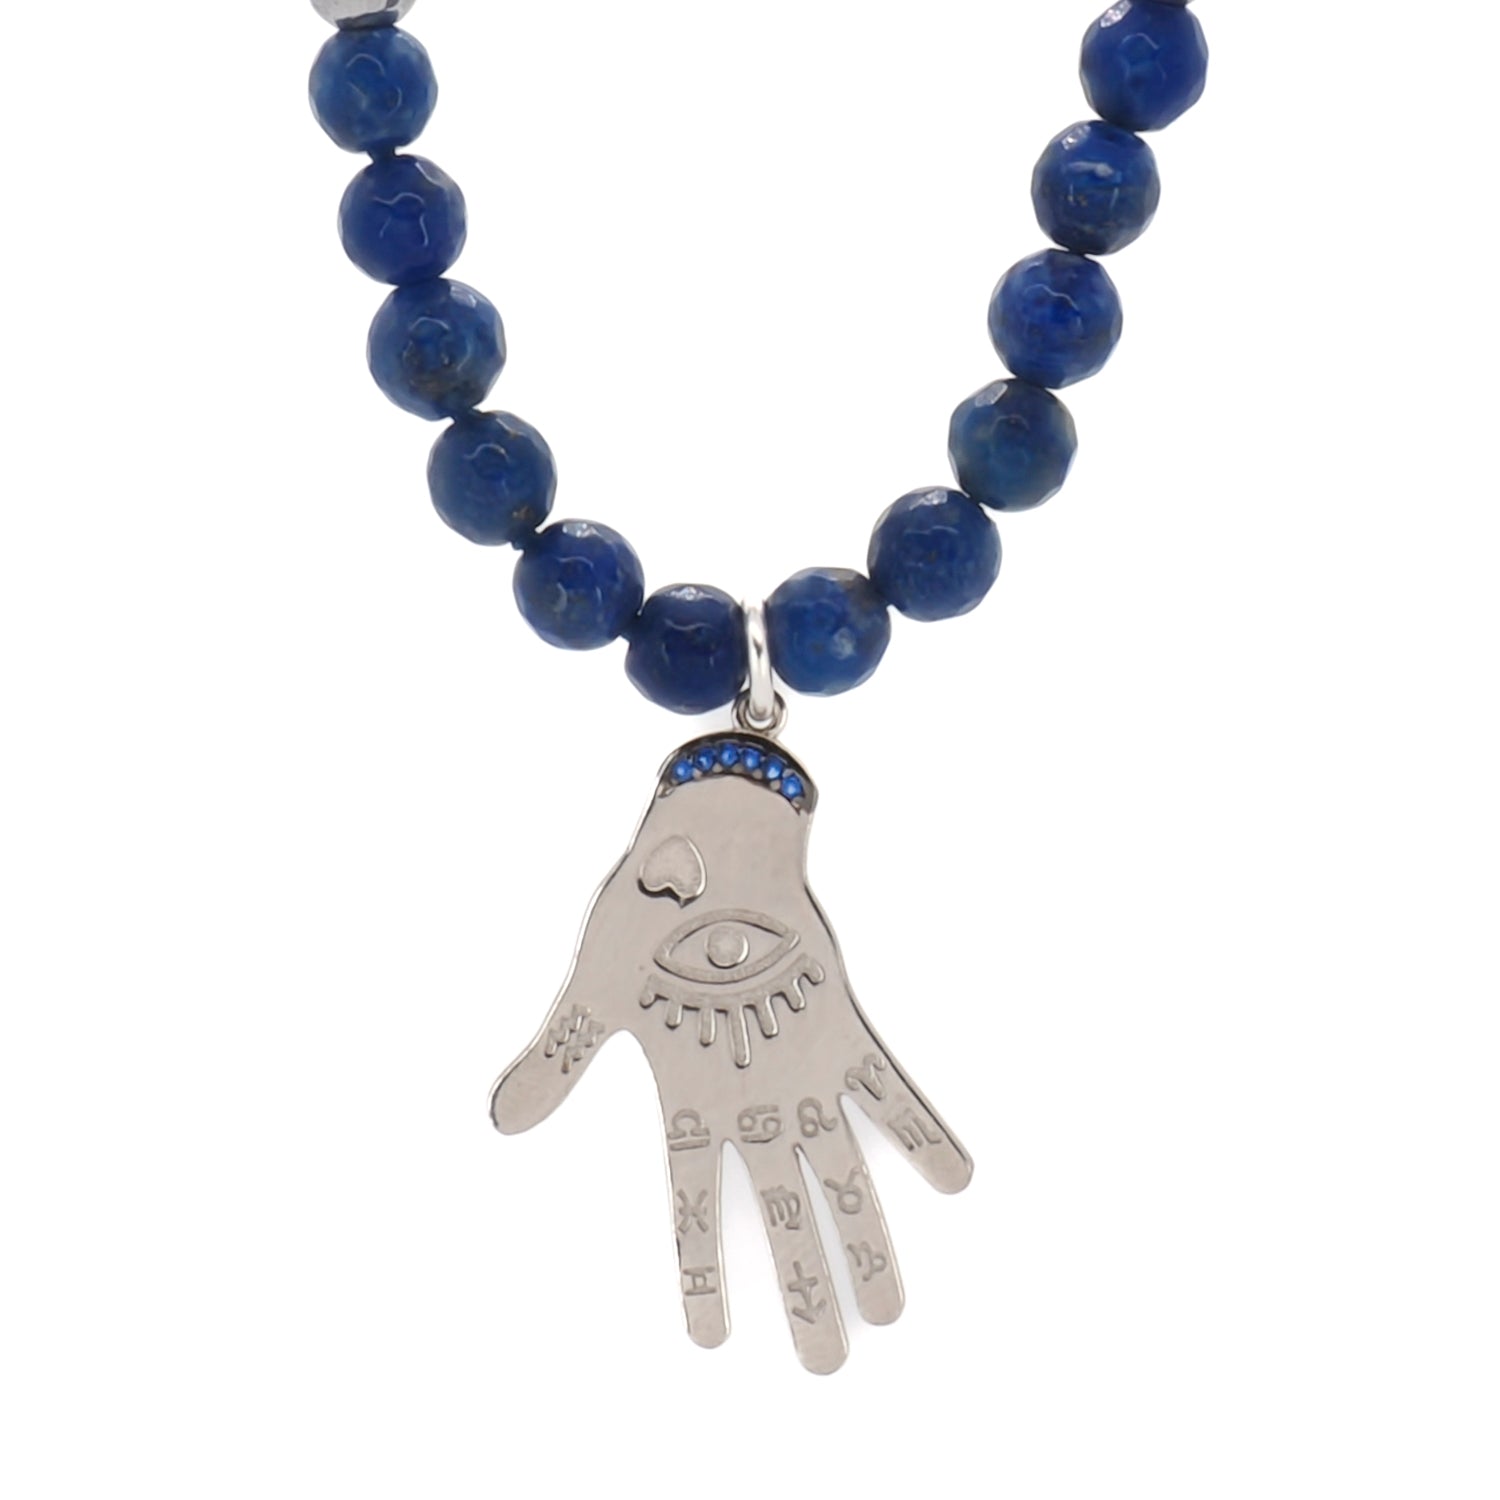 Blue and Silver Hamsa Pendant Necklace - Channel positive vibes and ward off negativity.